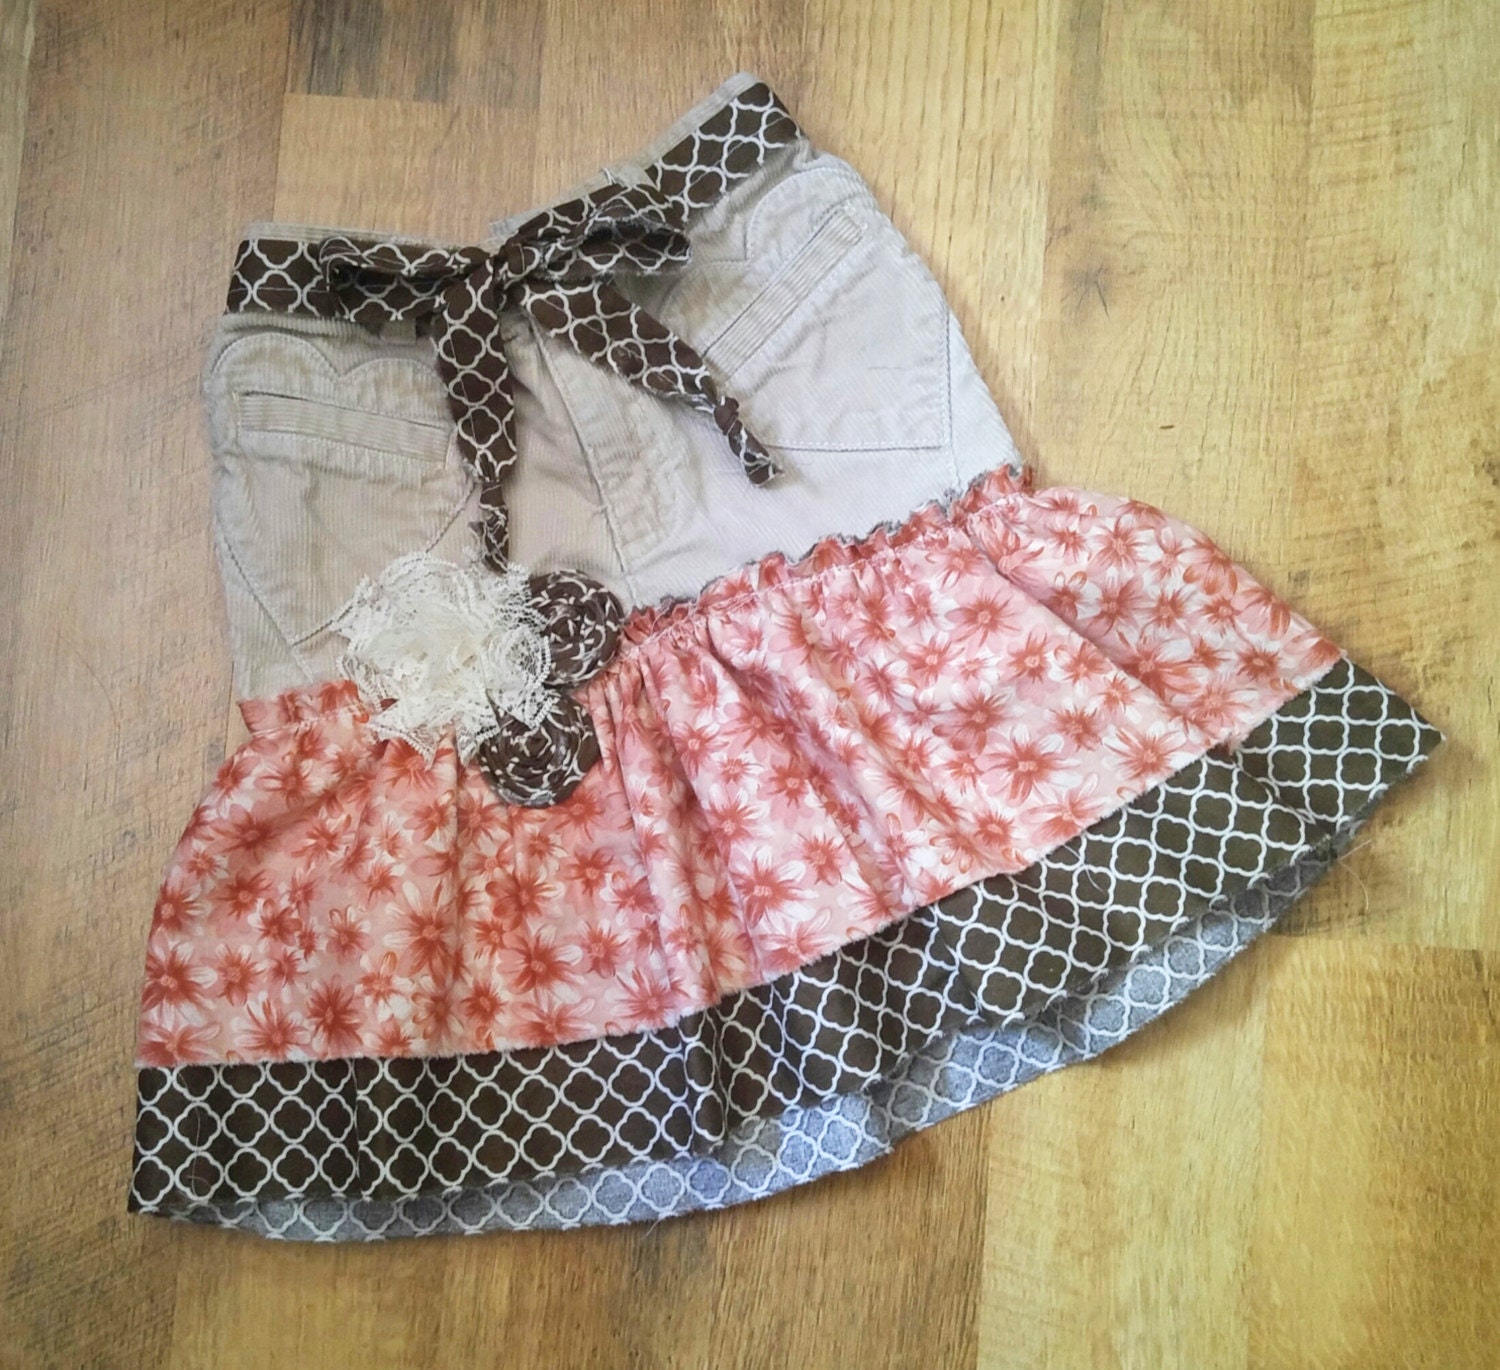 Repurposed skirt upcycled Girls skirts Upcycled Recycled